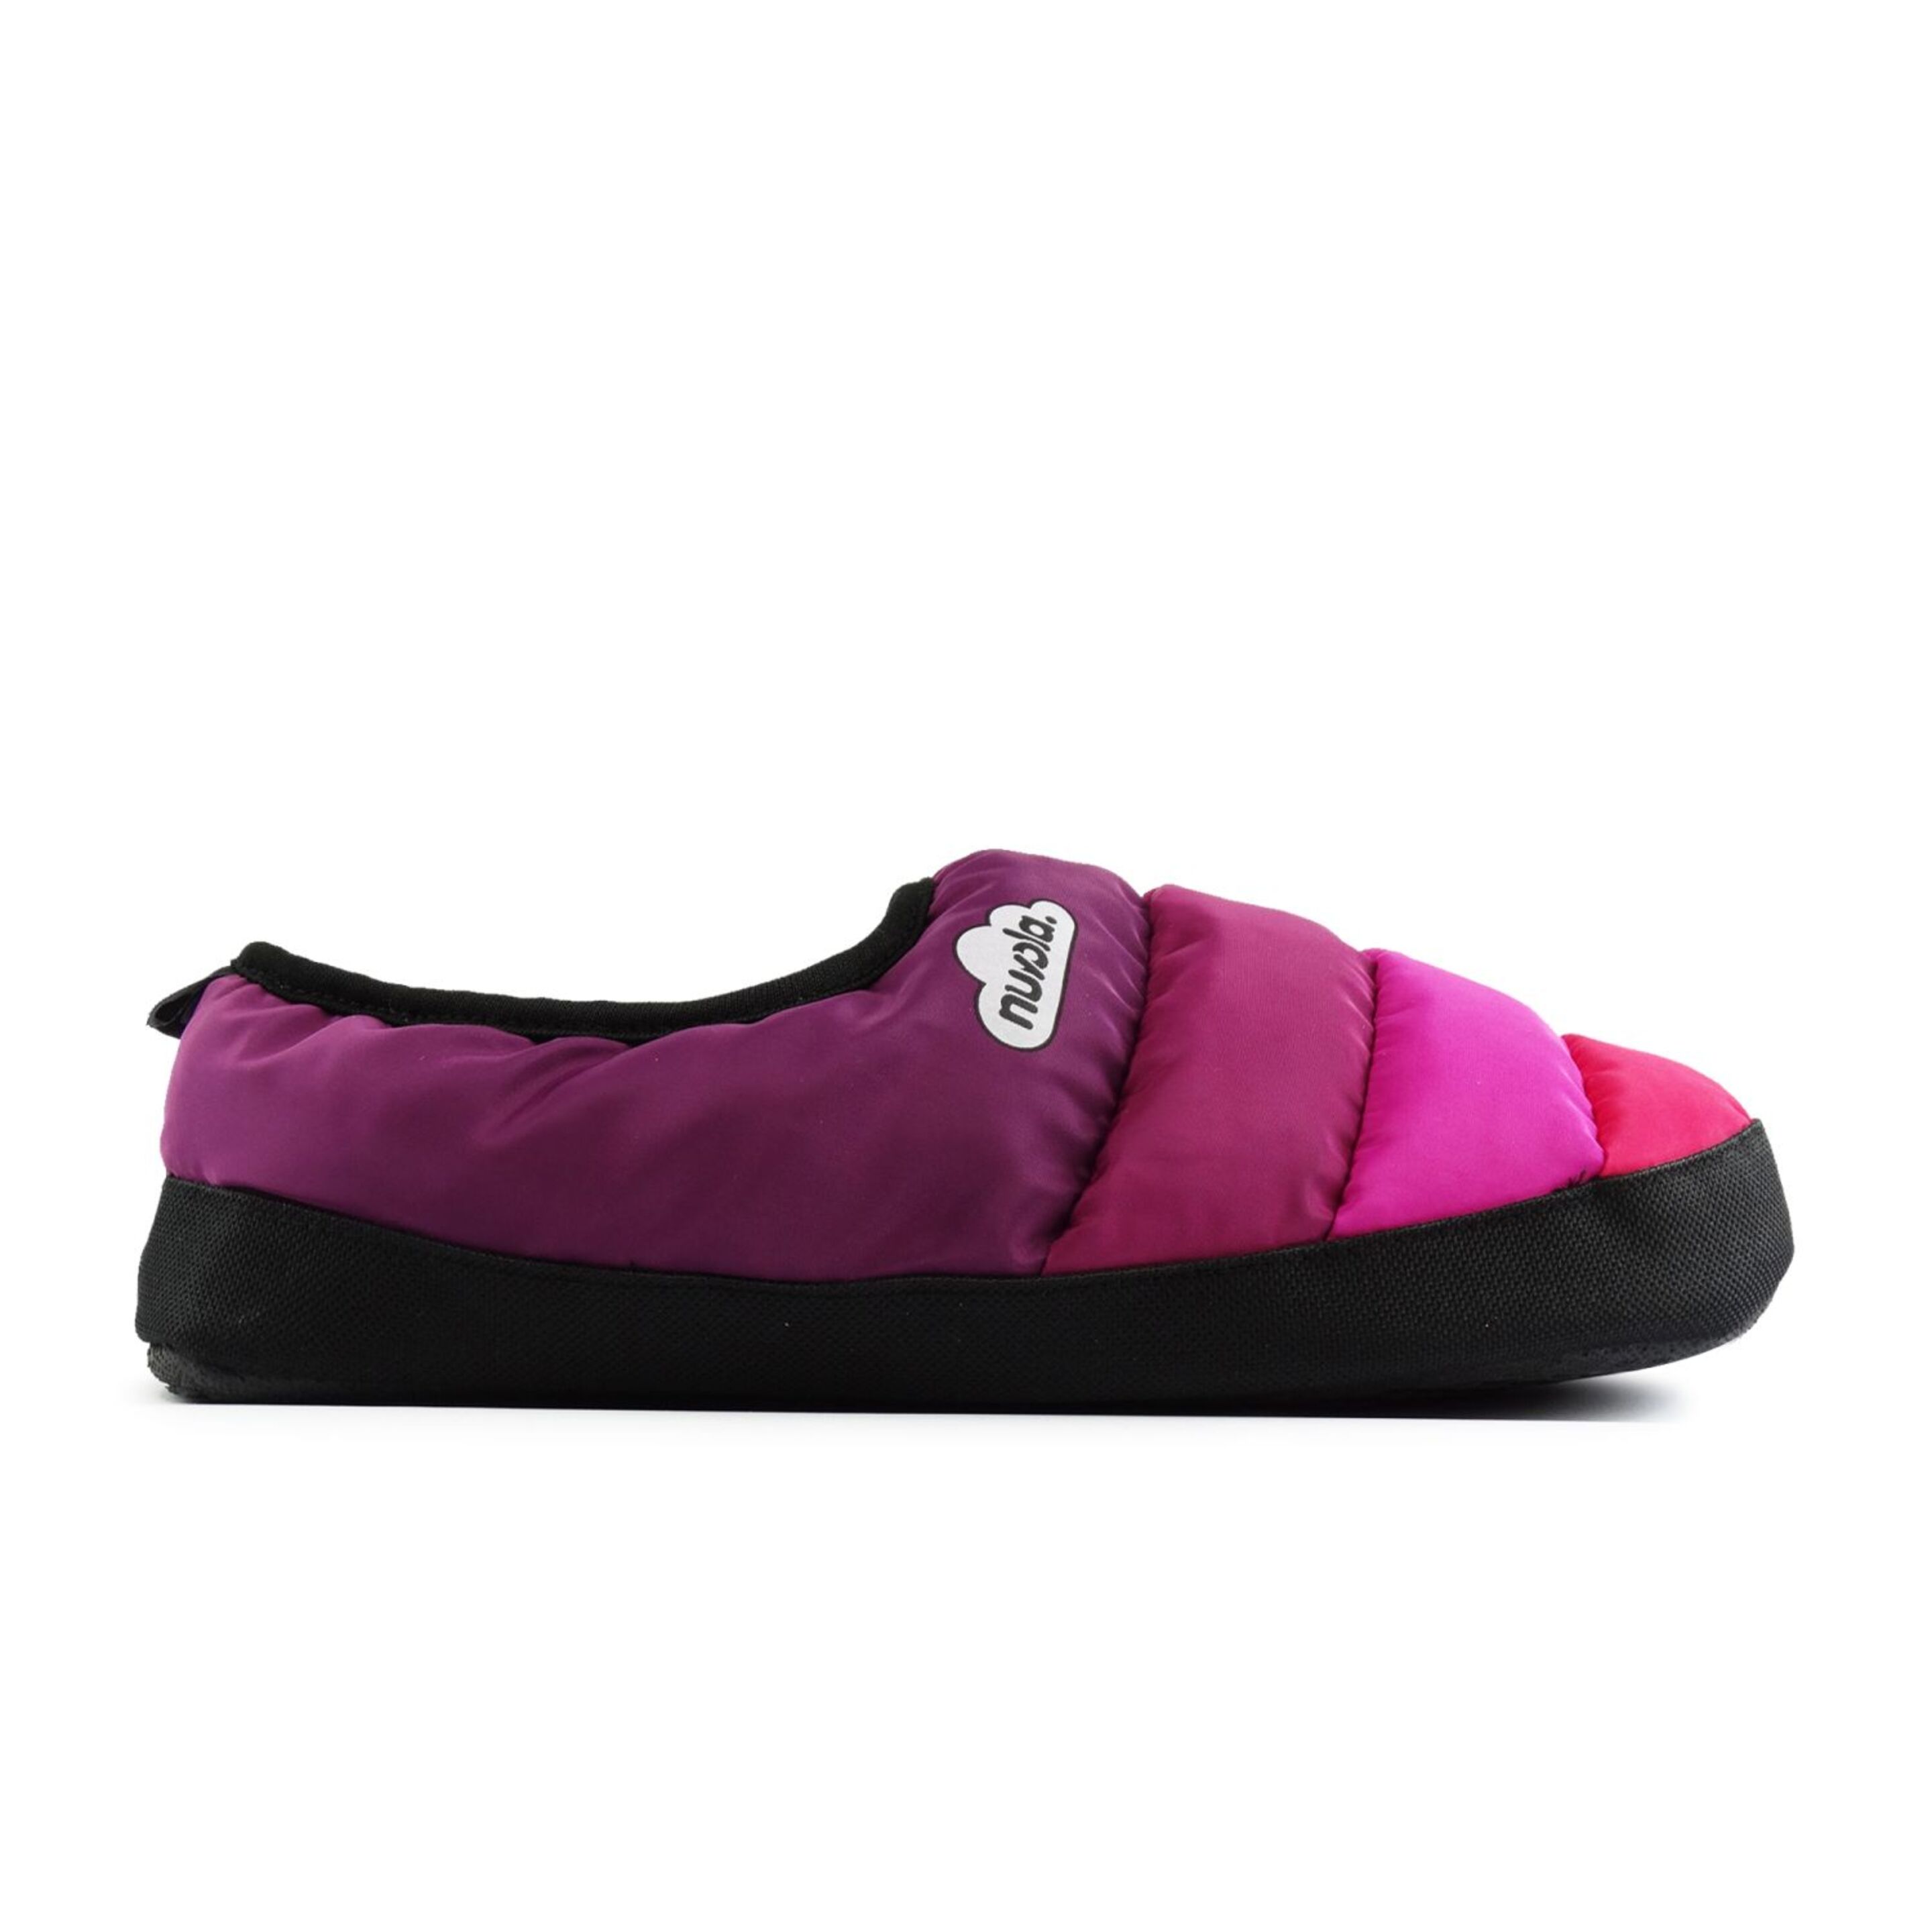 Slippers Camping NuvolaÂ®,clasica Colors